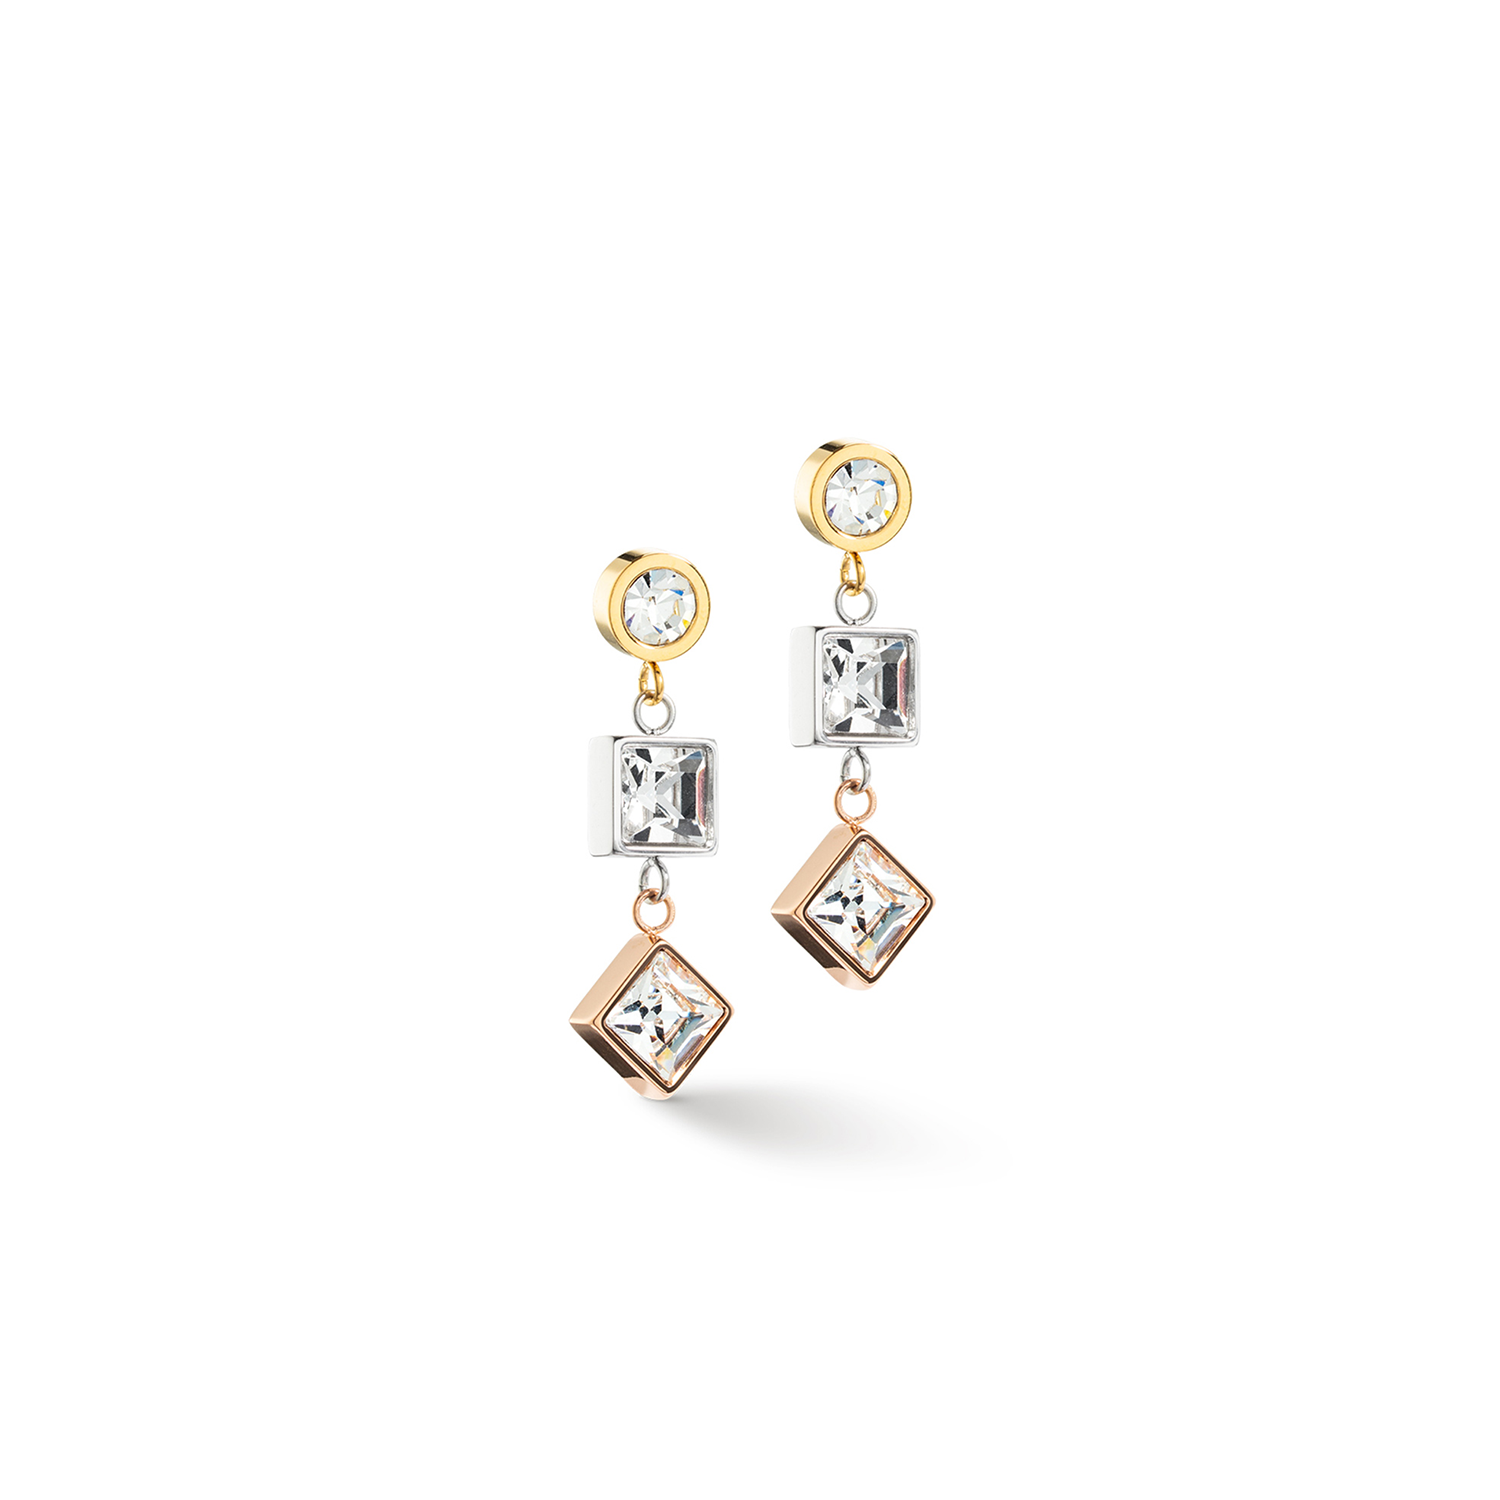 Three Tone Gold, Silver & Rose Gold Earrings 4545/21_1633